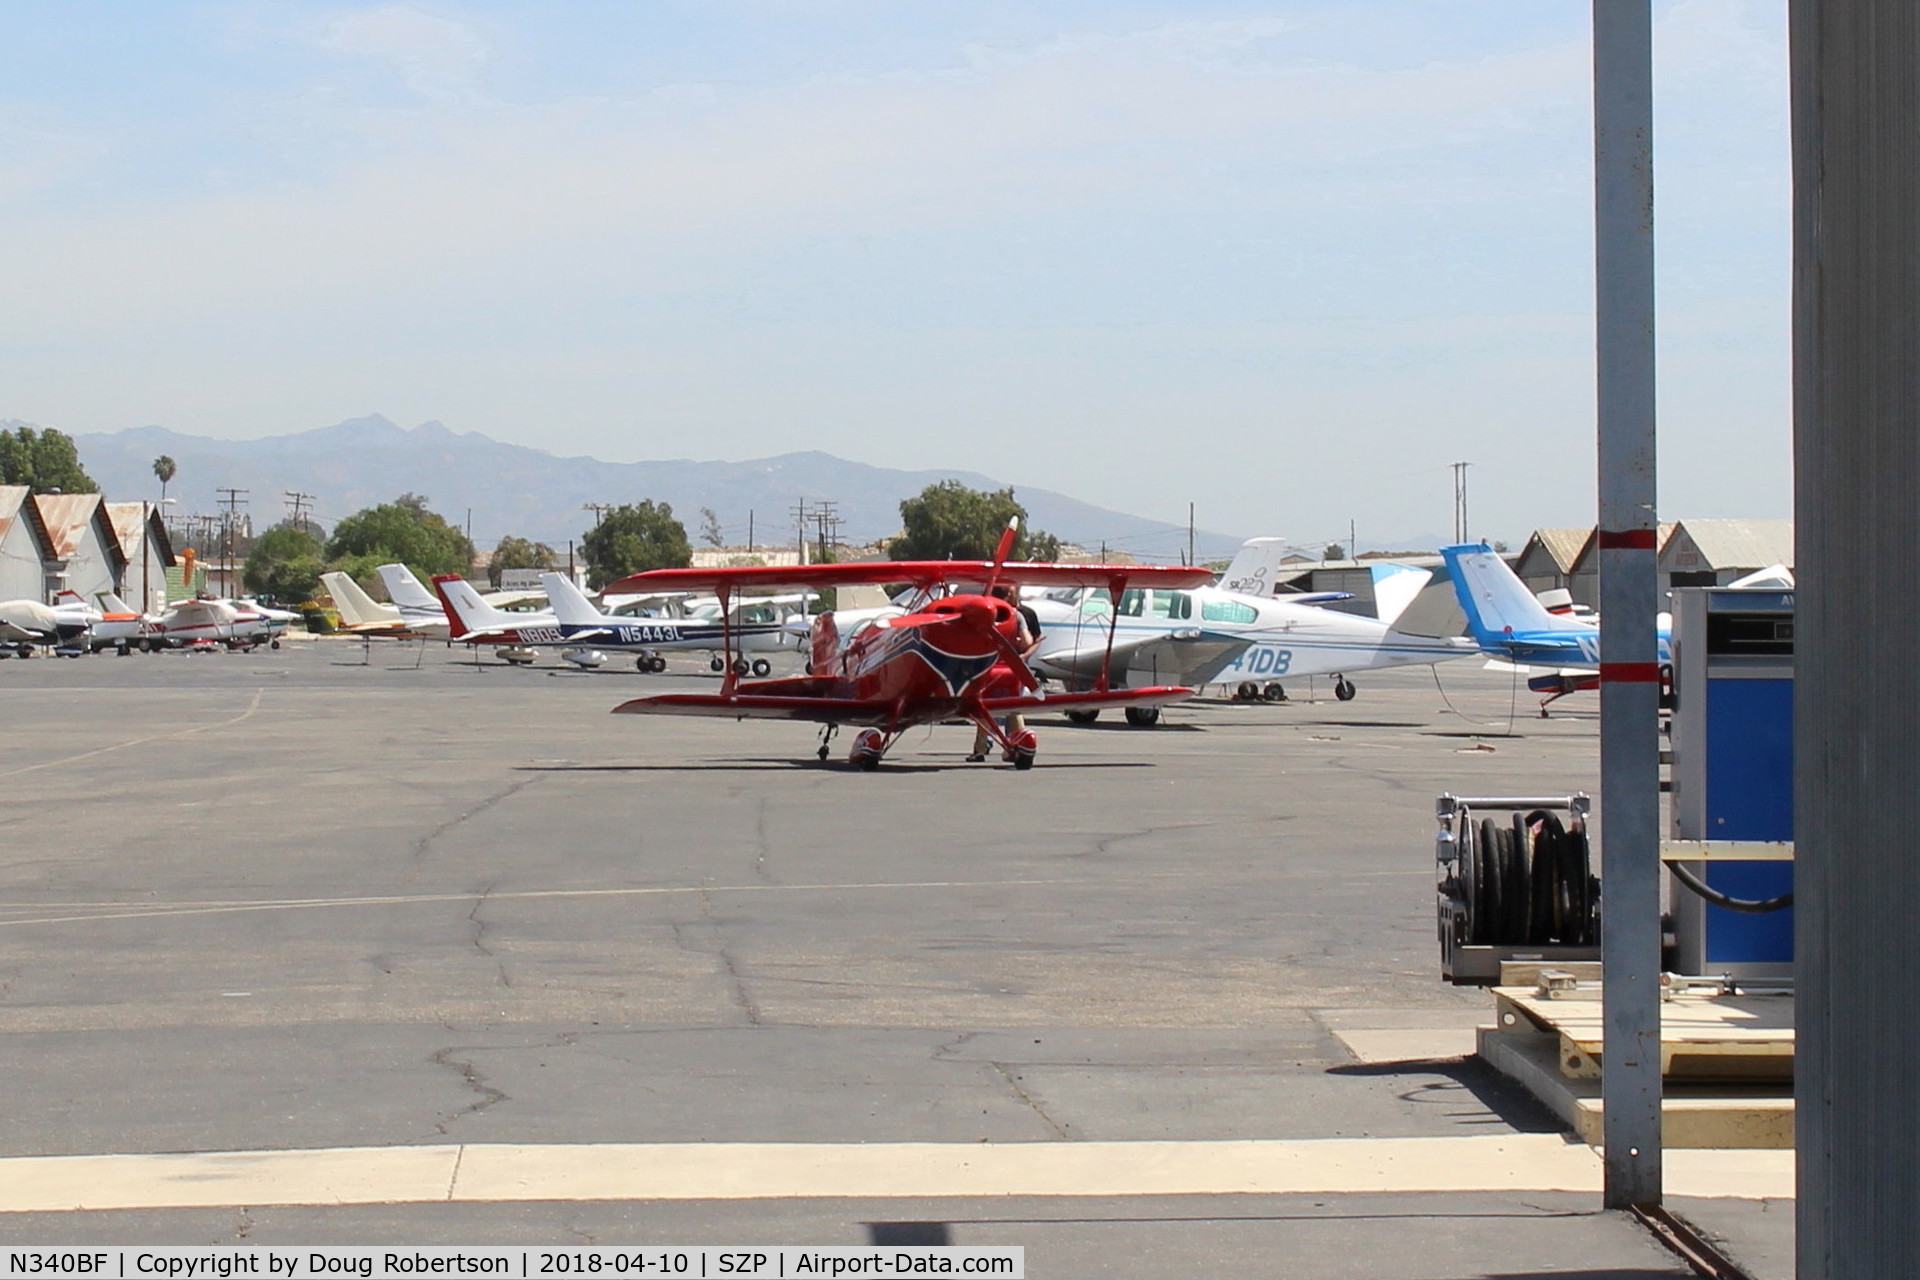 N340BF, 2003 Aviat Pitts S-2C Special C/N 6055, 2003 Aviat PITTS S-2C SPECIAL, Lycoming AEIO-540, nearing Fuel Dock